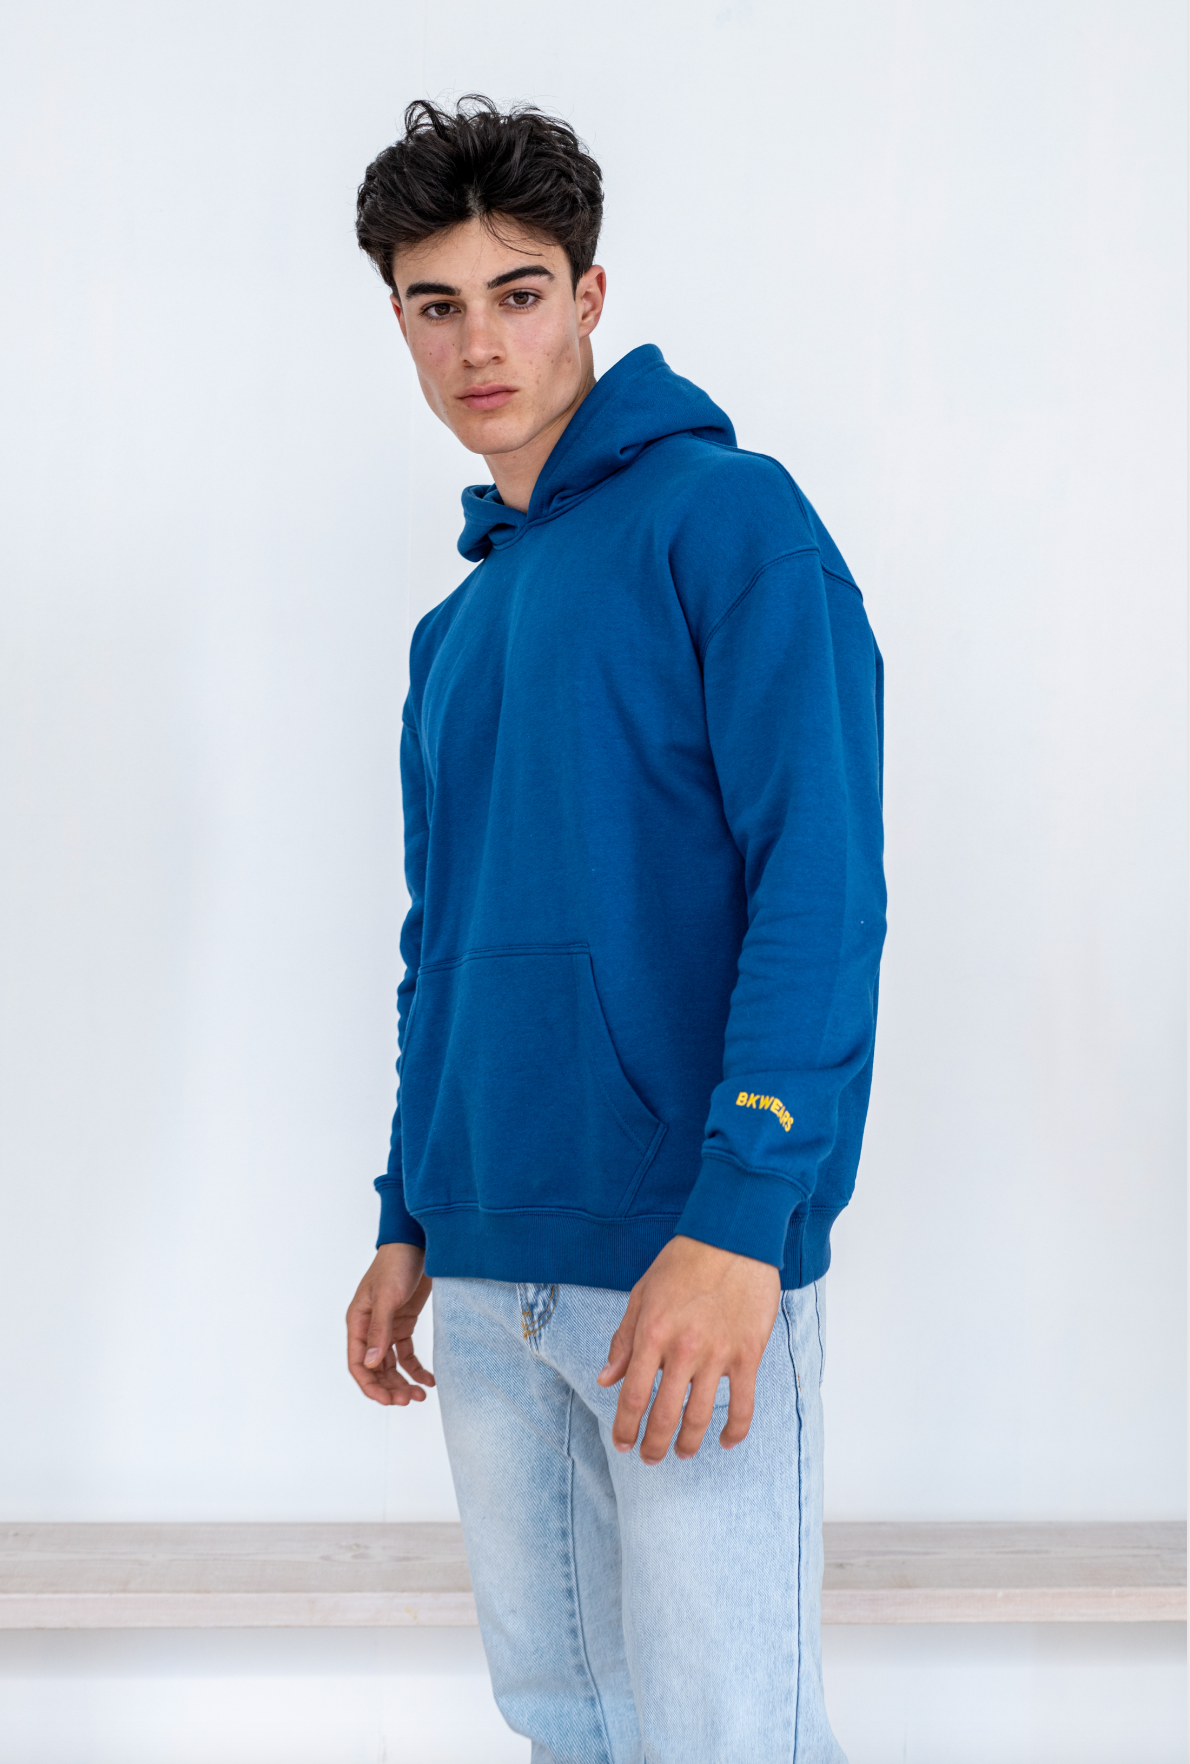 Royal Blue 'Protect your Peace' - Hoodie